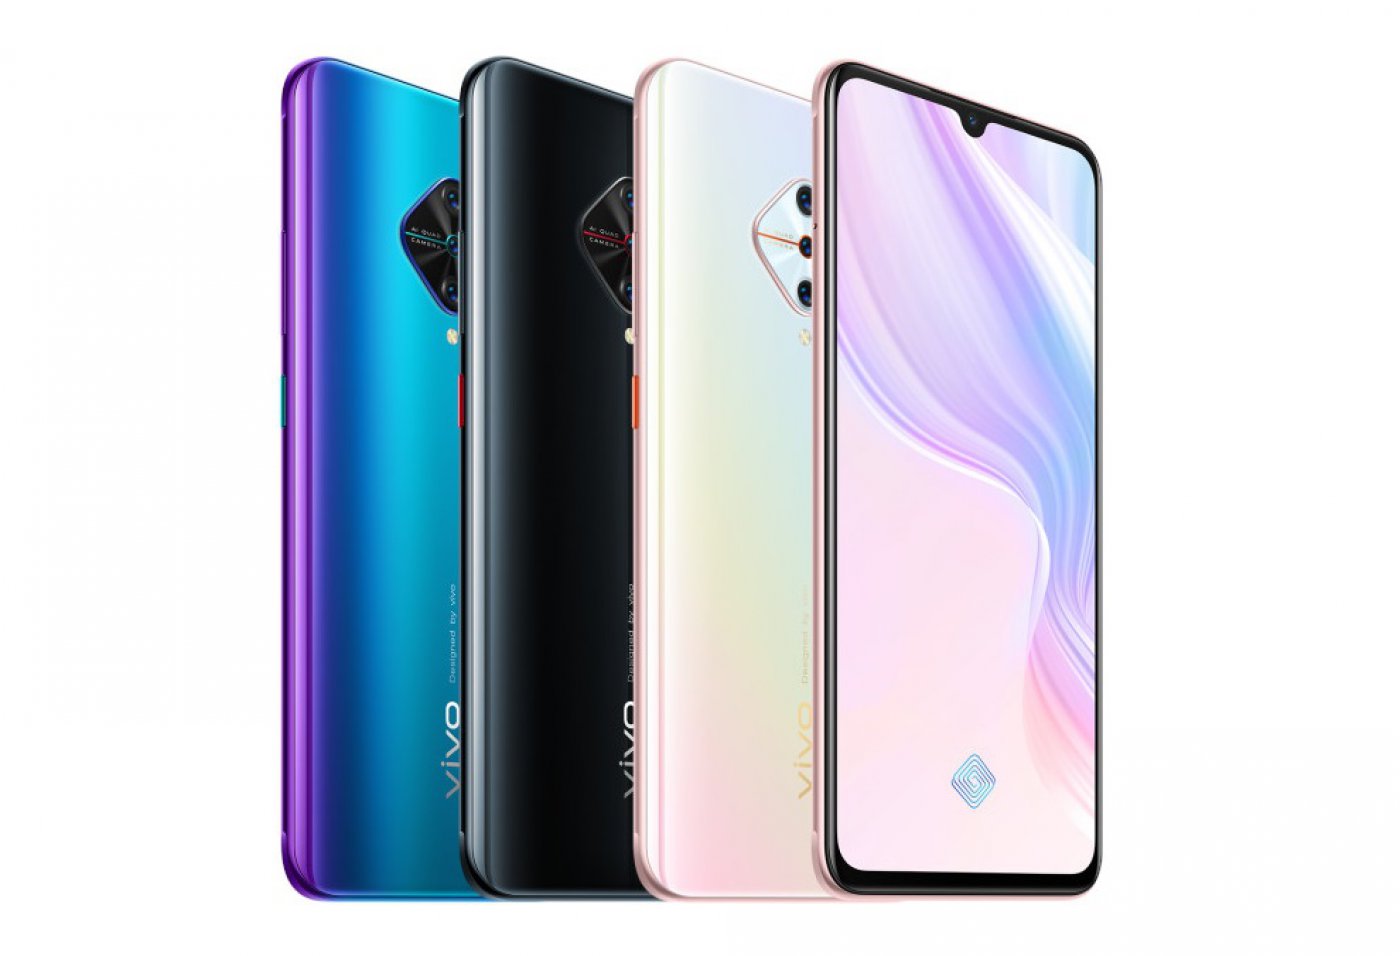 Review of the Vivo Y9s smartphone with the main characteristics